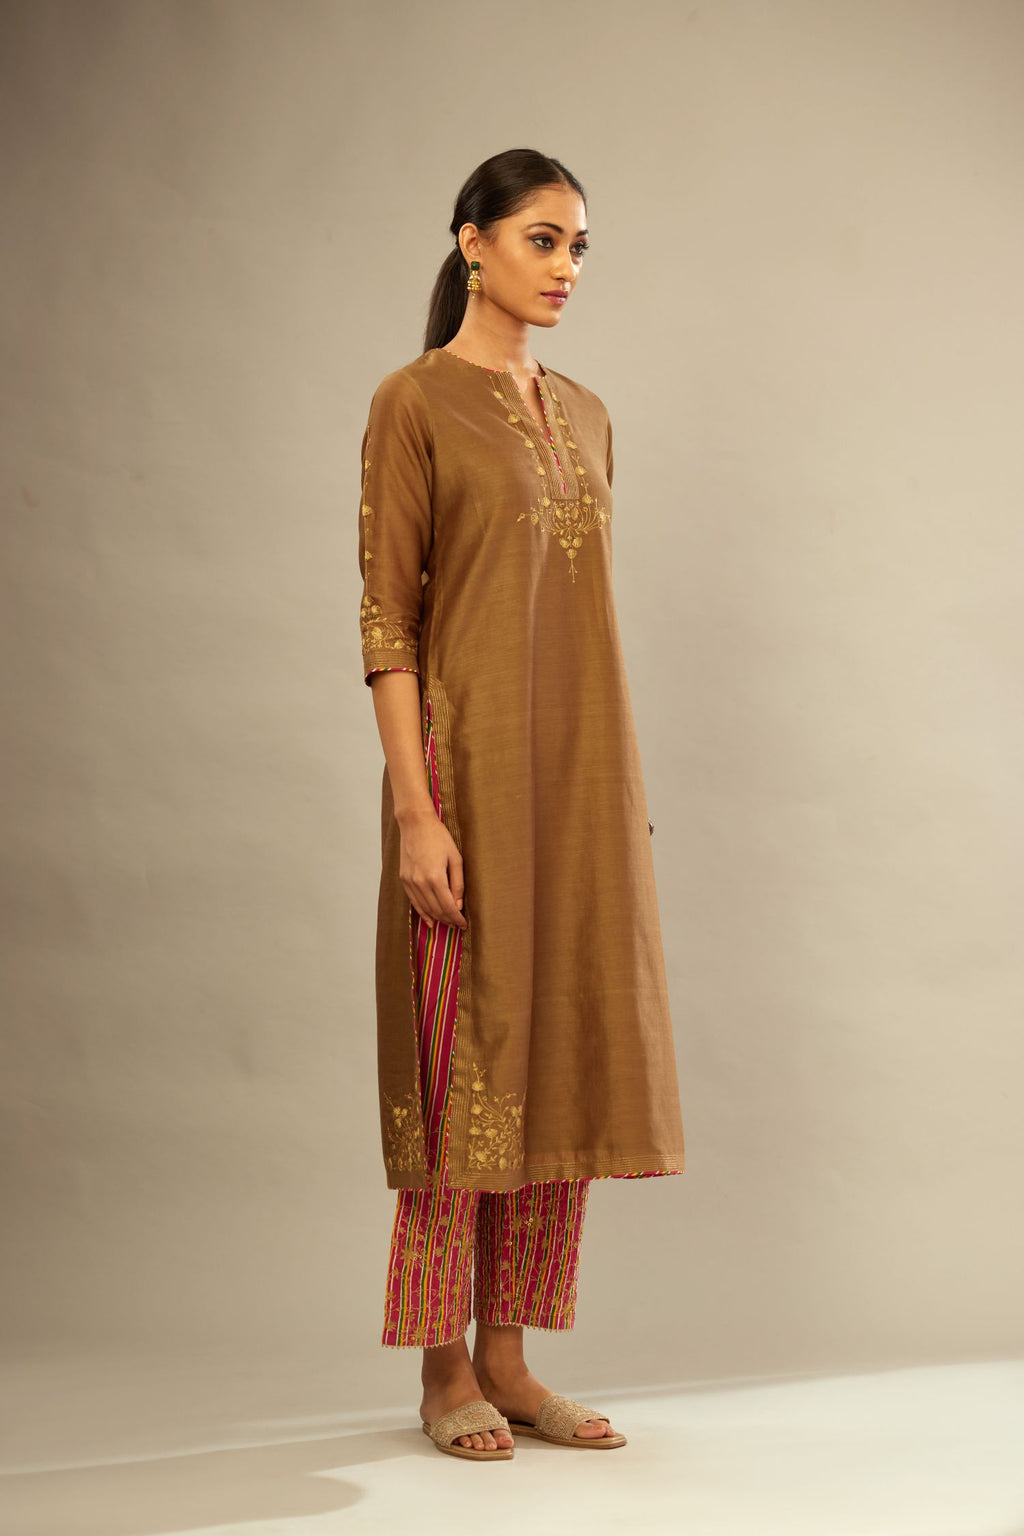 Olive silk Chanderi kurta set with zari embroidery, highlighted with golden zari quilting